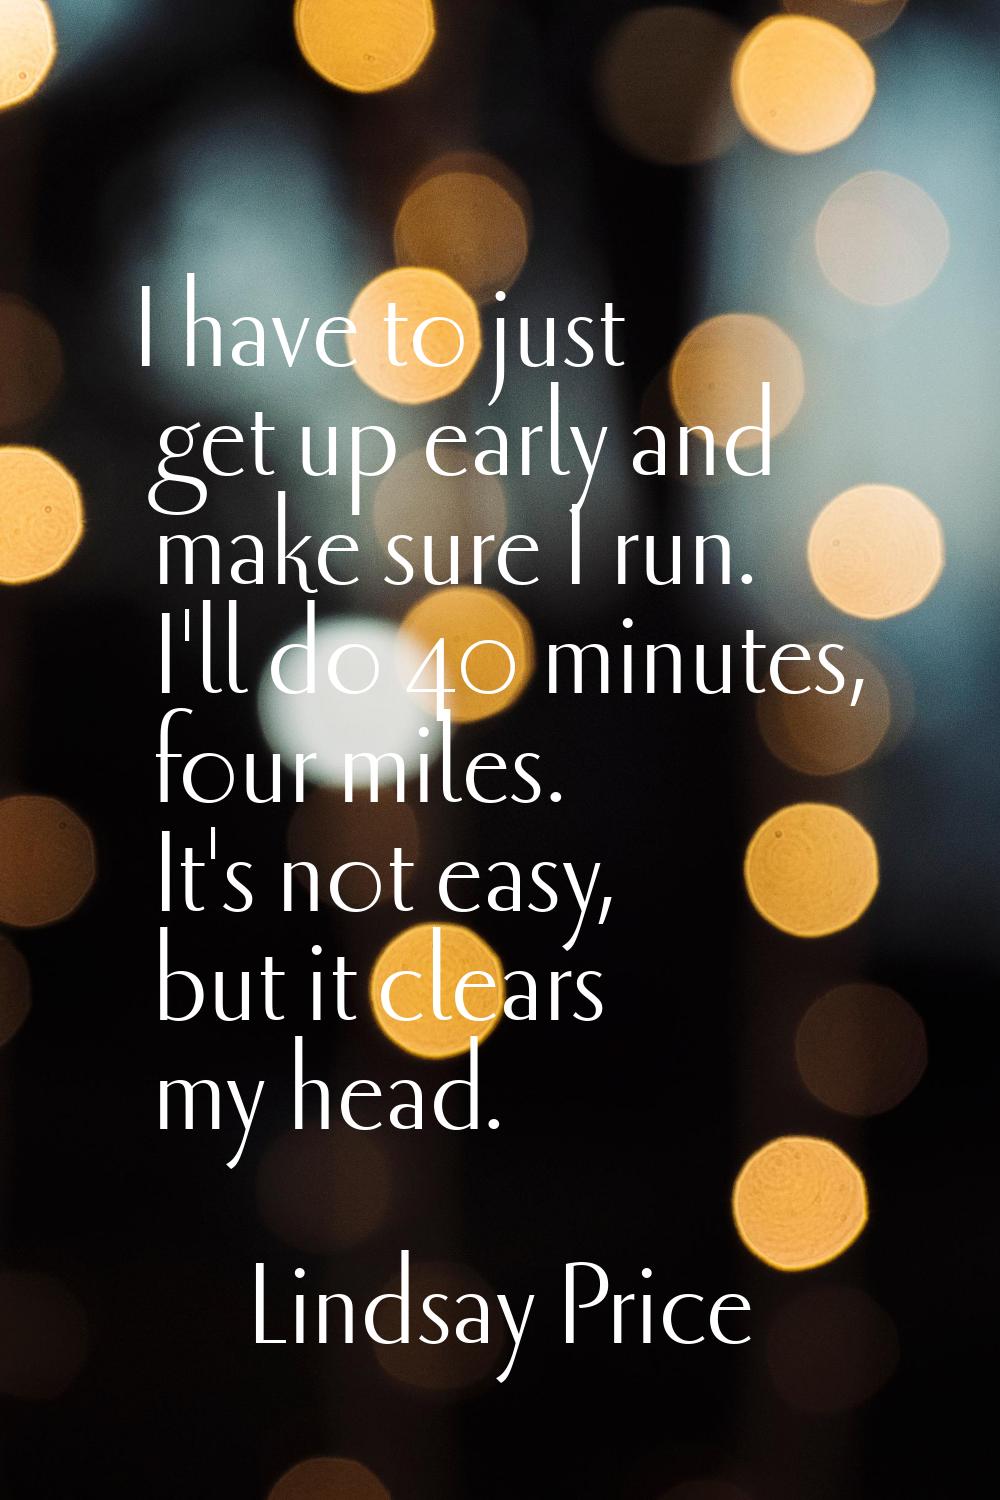 I have to just get up early and make sure I run. I'll do 40 minutes, four miles. It's not easy, but